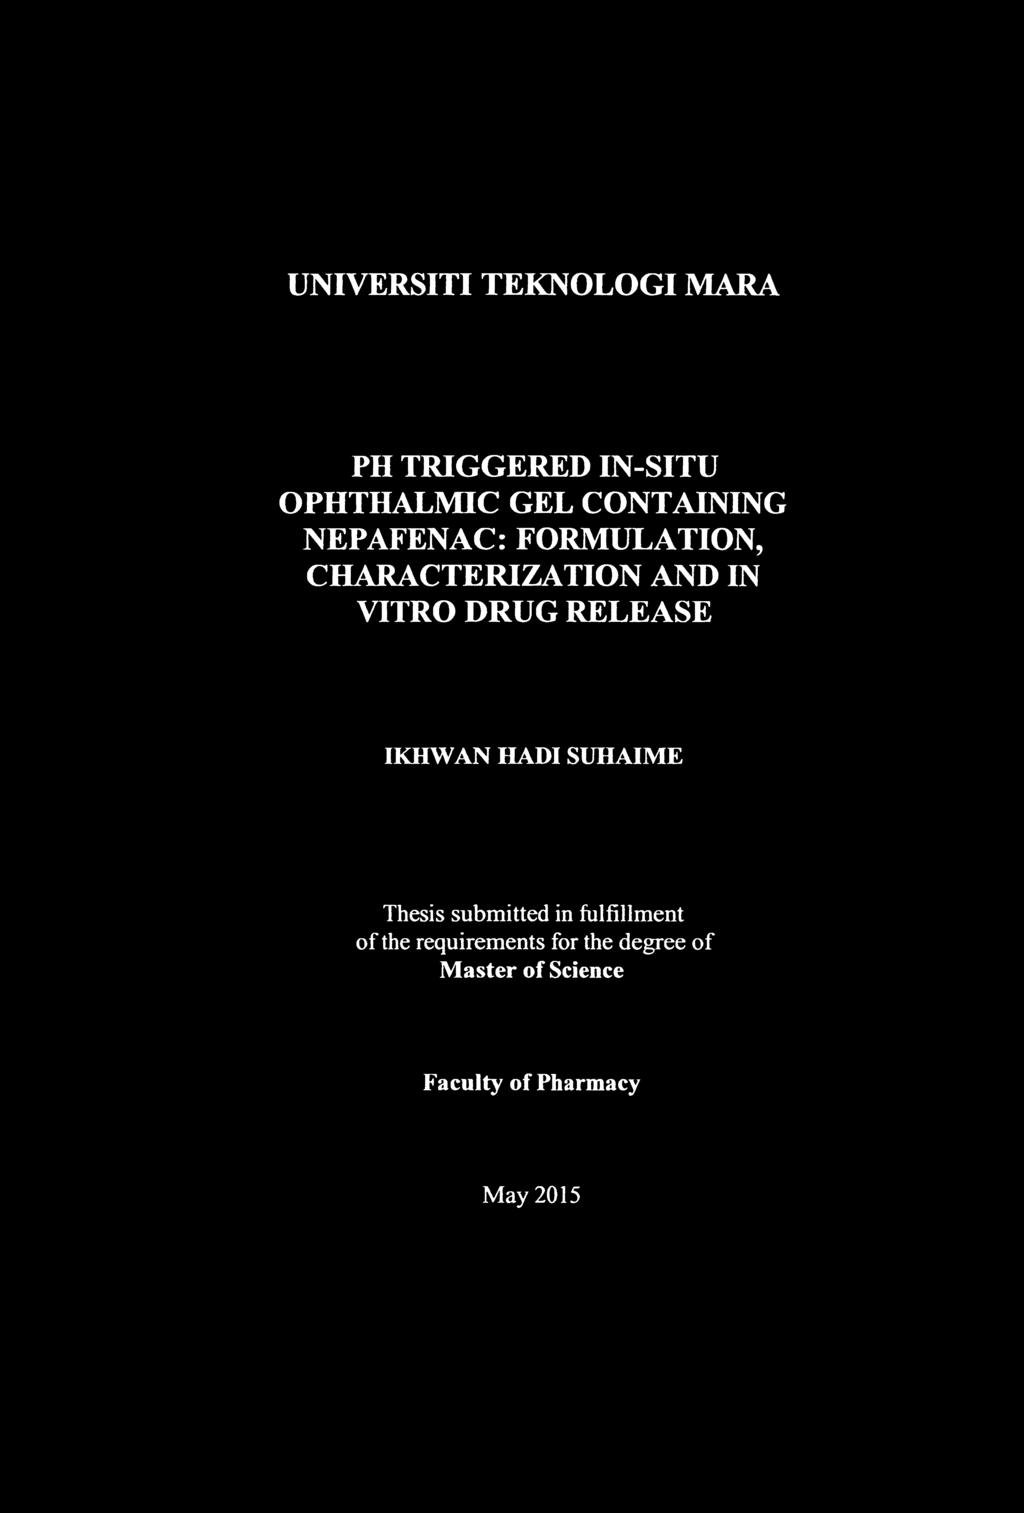 DRUG RELEASE IKHWAN HADI SUHAIME Thesis submitted in fulfillment of